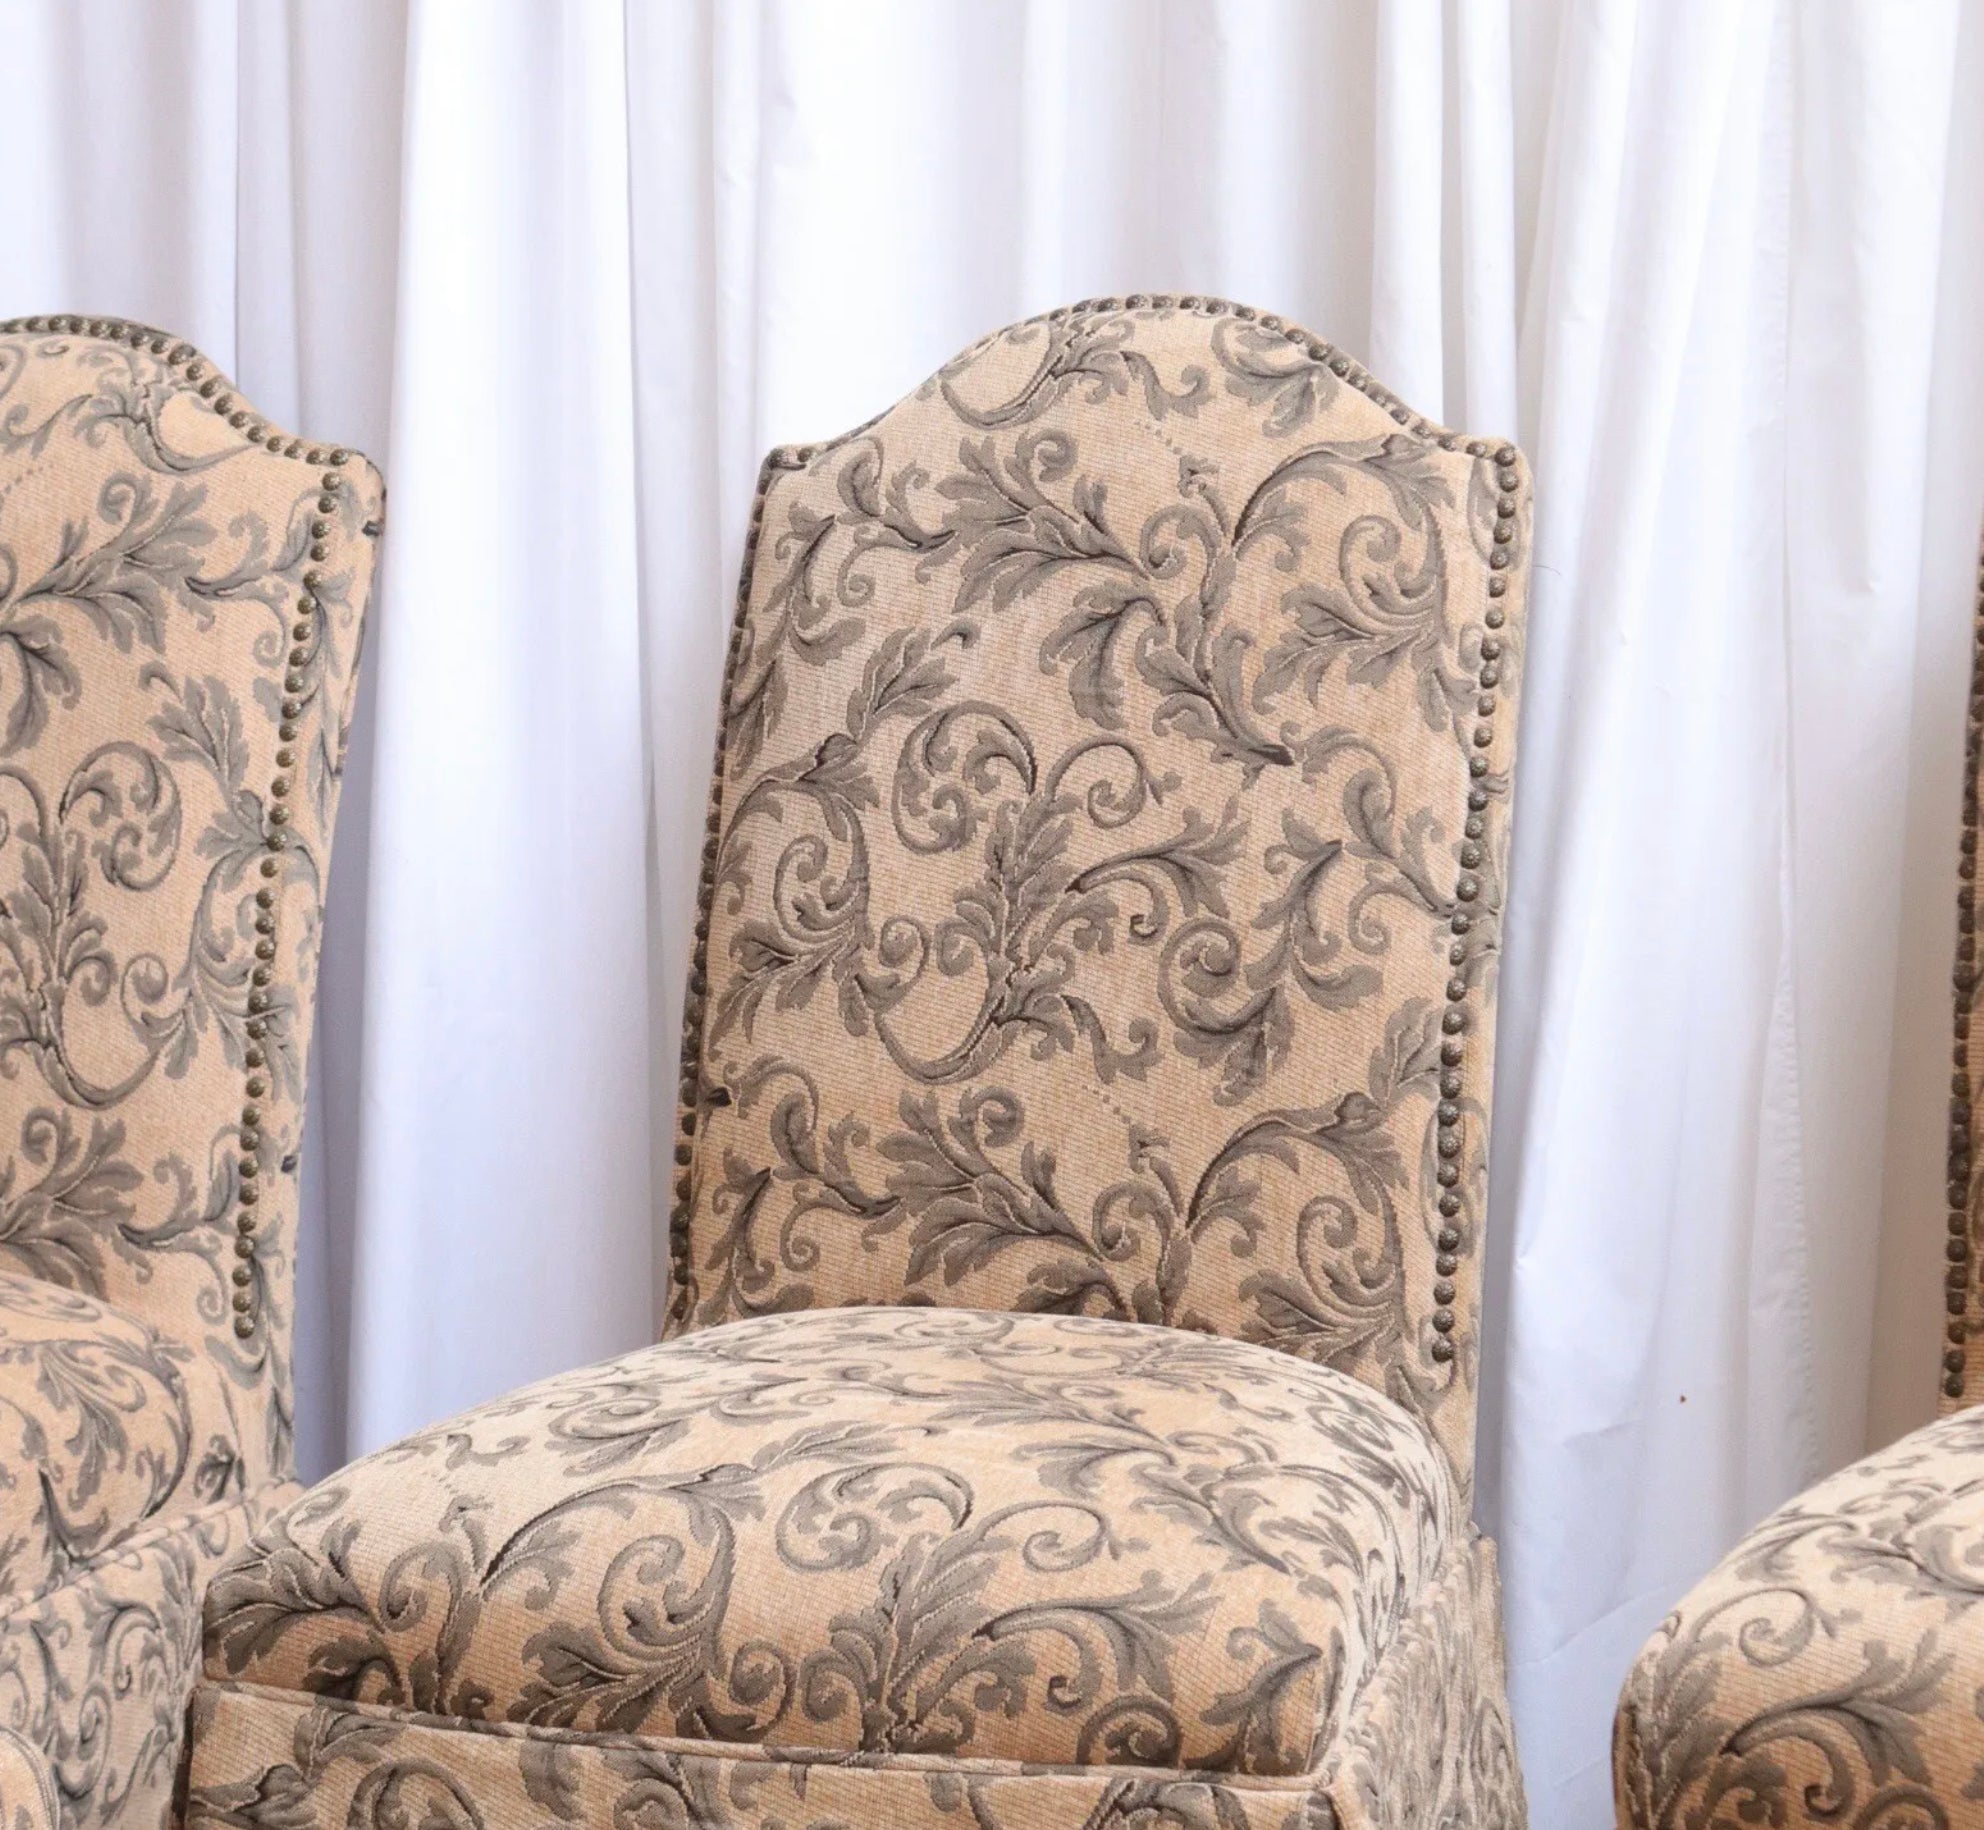 Set of 6 Beautiful Skirted Country House Antique Style Dining Chairs - teakyfinders